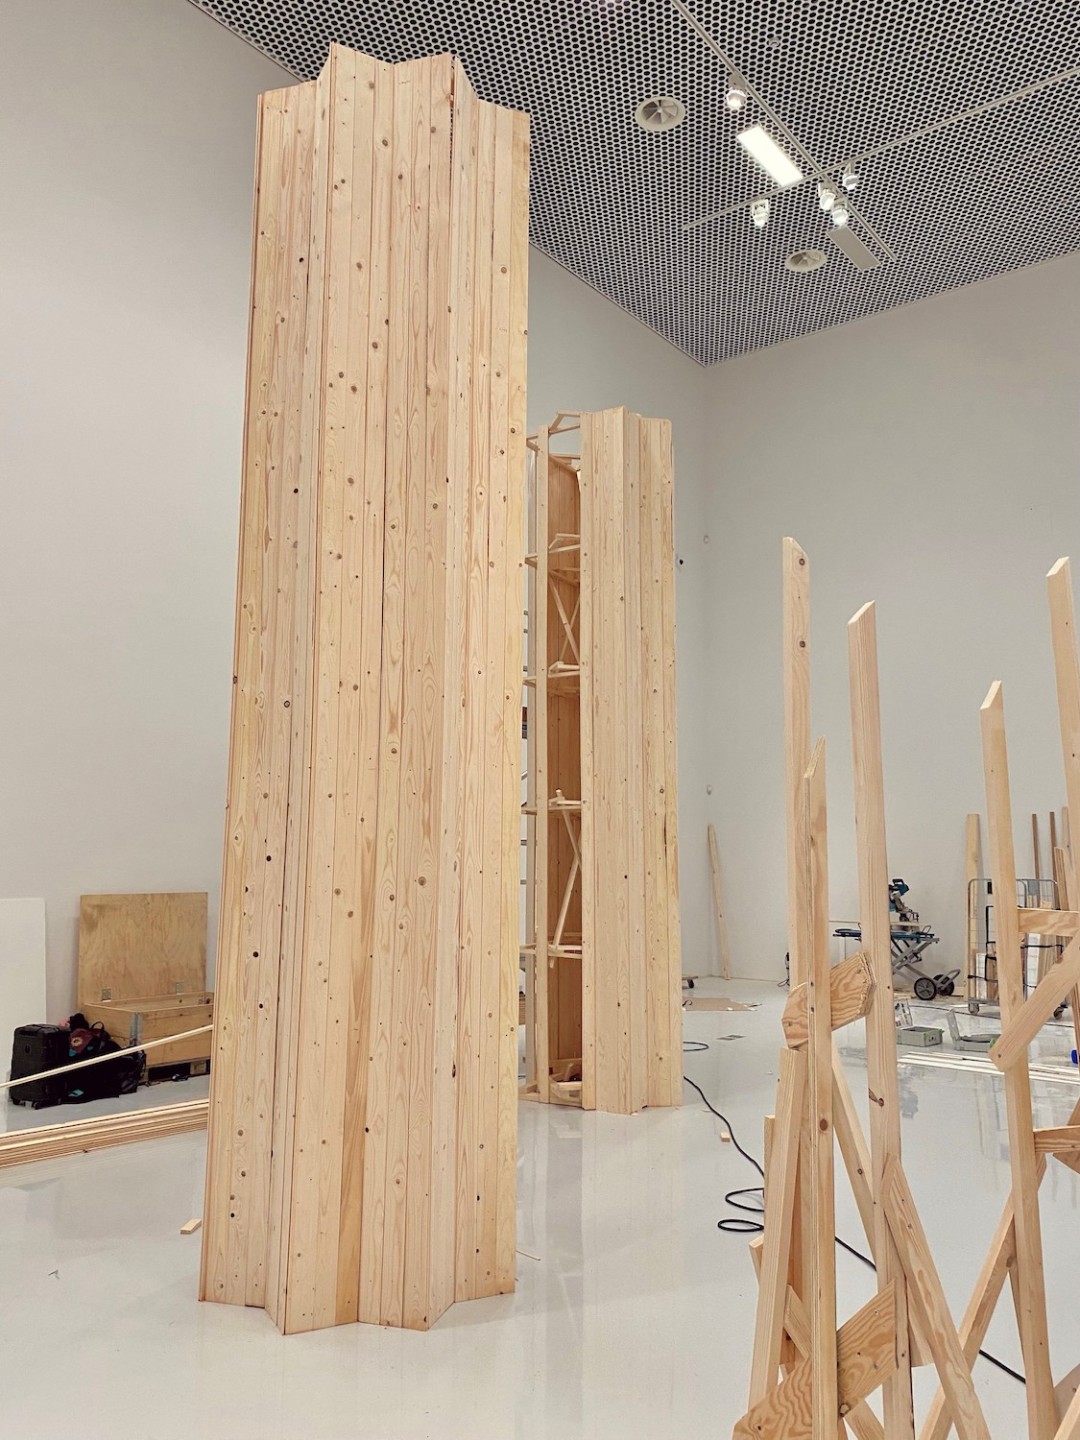 Photo of wooden towers in the making